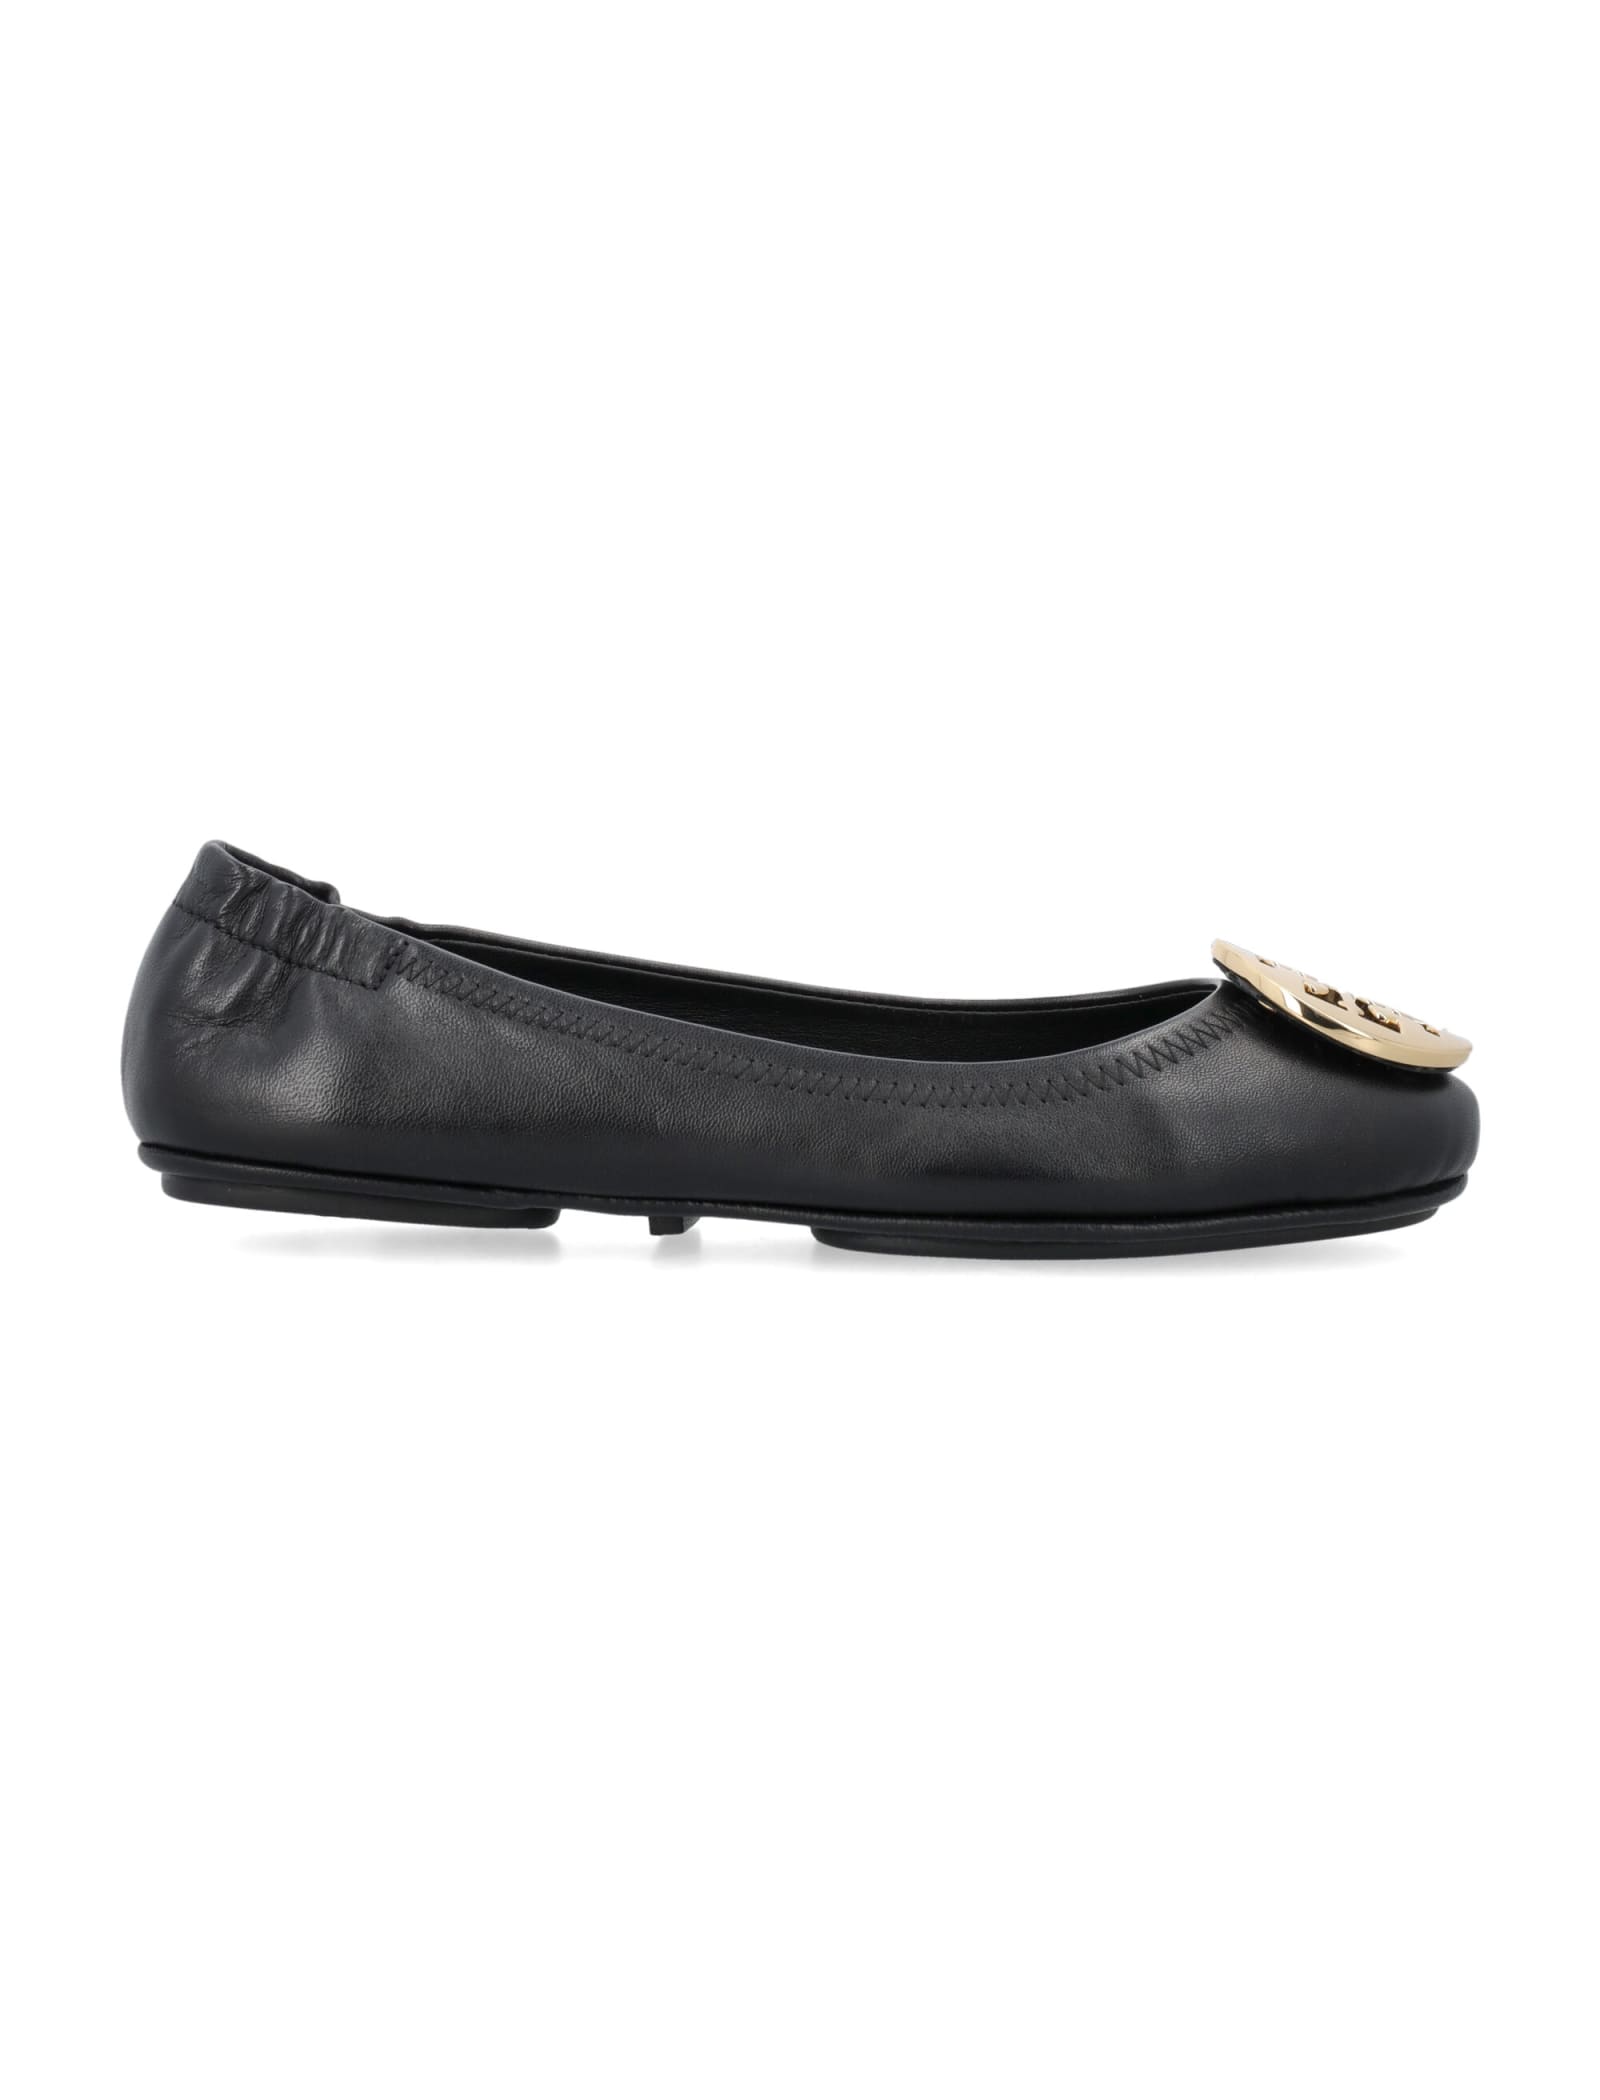 Shop Tory Burch Minnie Travel Ballet In Perfect Black / Gold